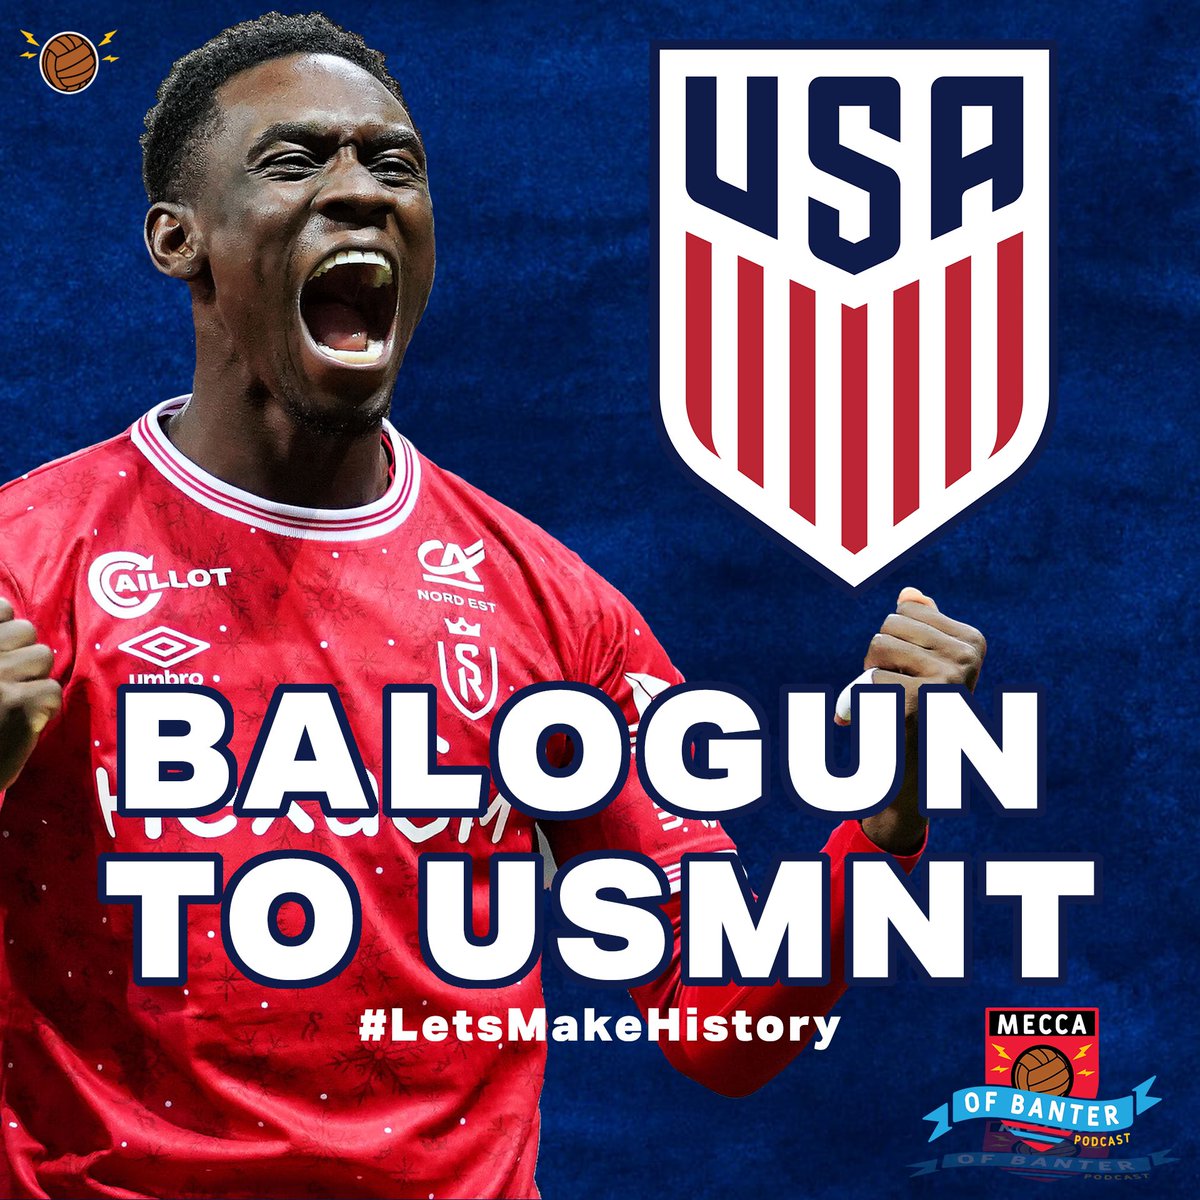 IT’S HAPPENING! @balogun 

21 year old Folarin Balogun has decided to officially represent the @usmnt at the international level. 

FIFA confirmed today that it’s approved a request to change Balogun’s national eligibility from England.

#letsmakehistory #usmnt #balogun